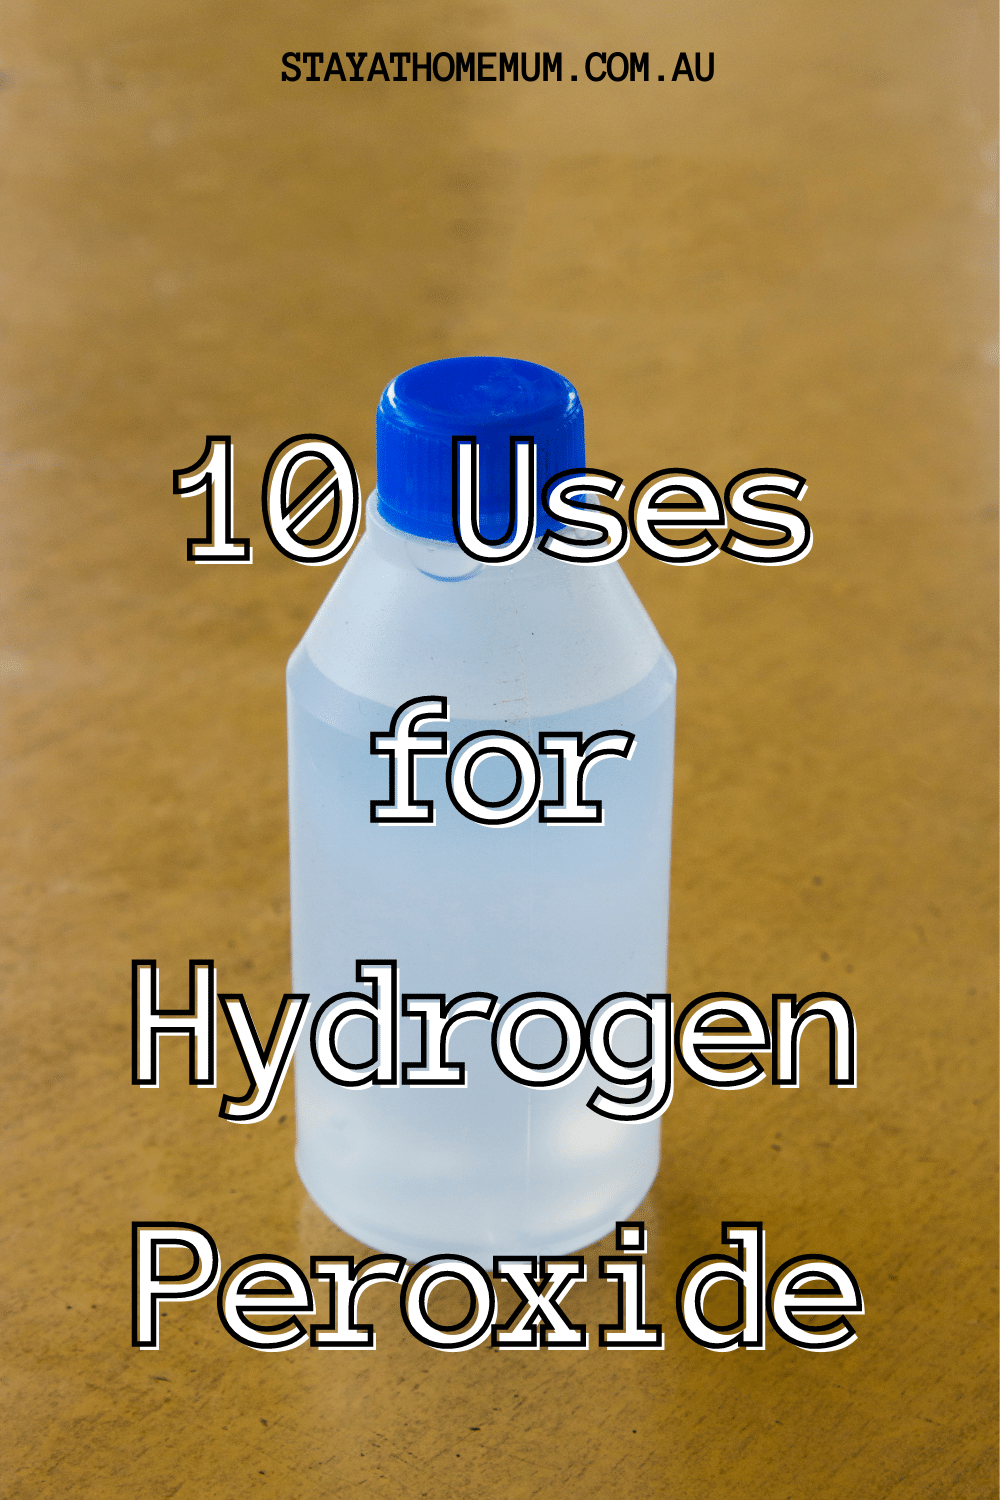 10 Uses for Hydrogen | Stay at Home Mum.com.au